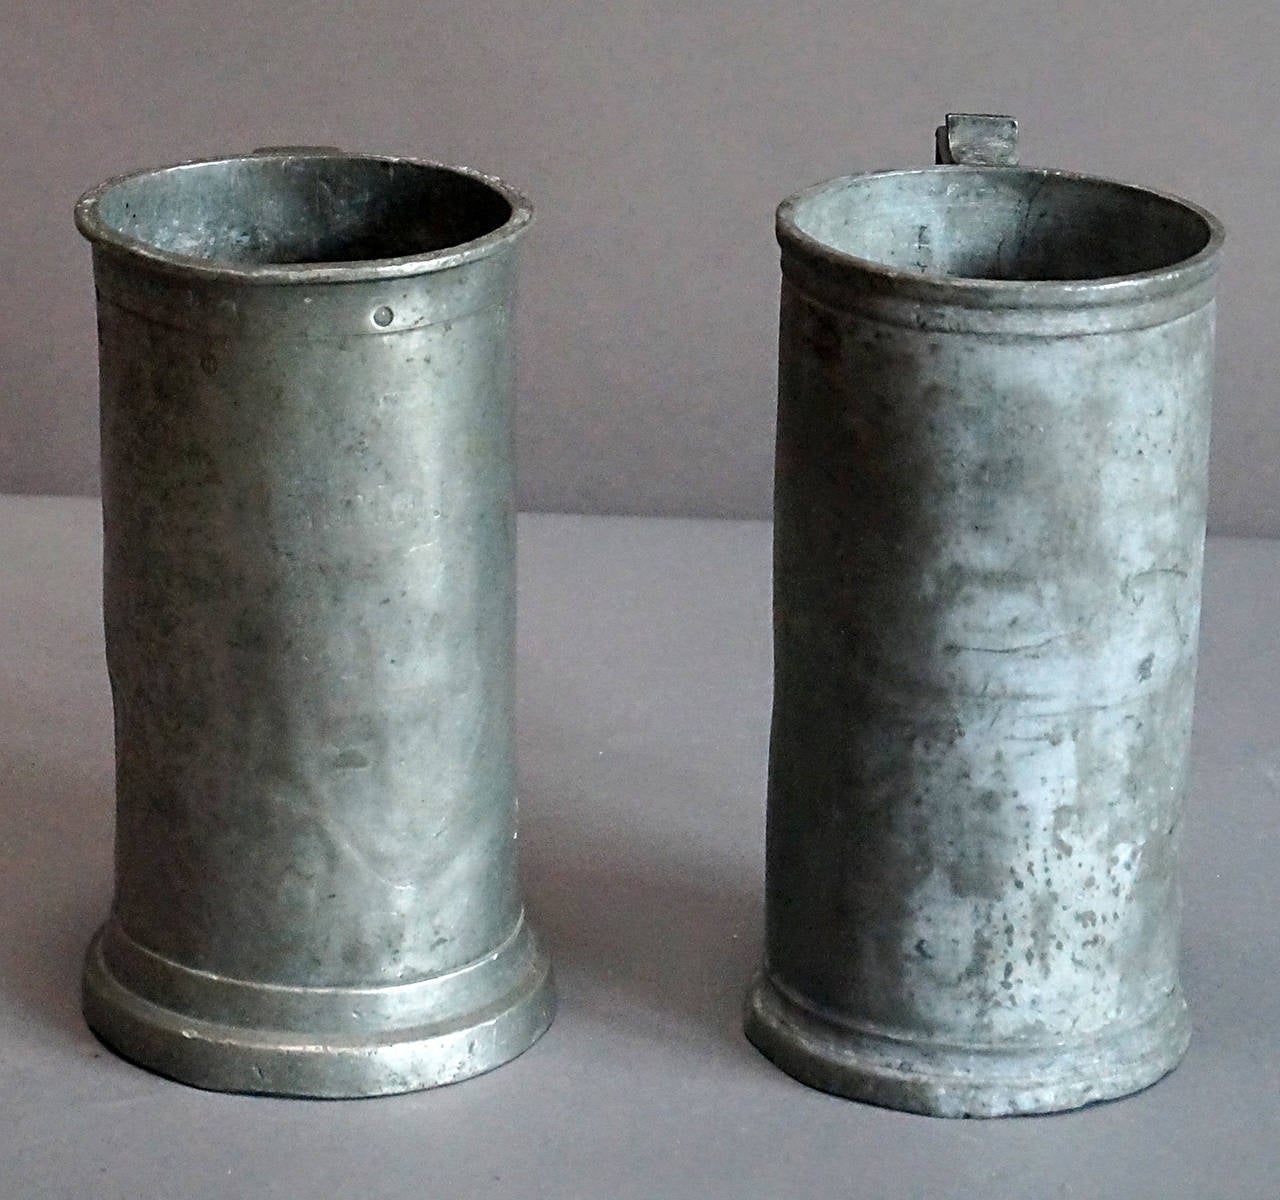 Assembled pair of 1 liter pewter measures, France circa 1820. One has an anchor hallmark and the other is marked with a punched diamond and various punched letters which may indicate date of manufacture.